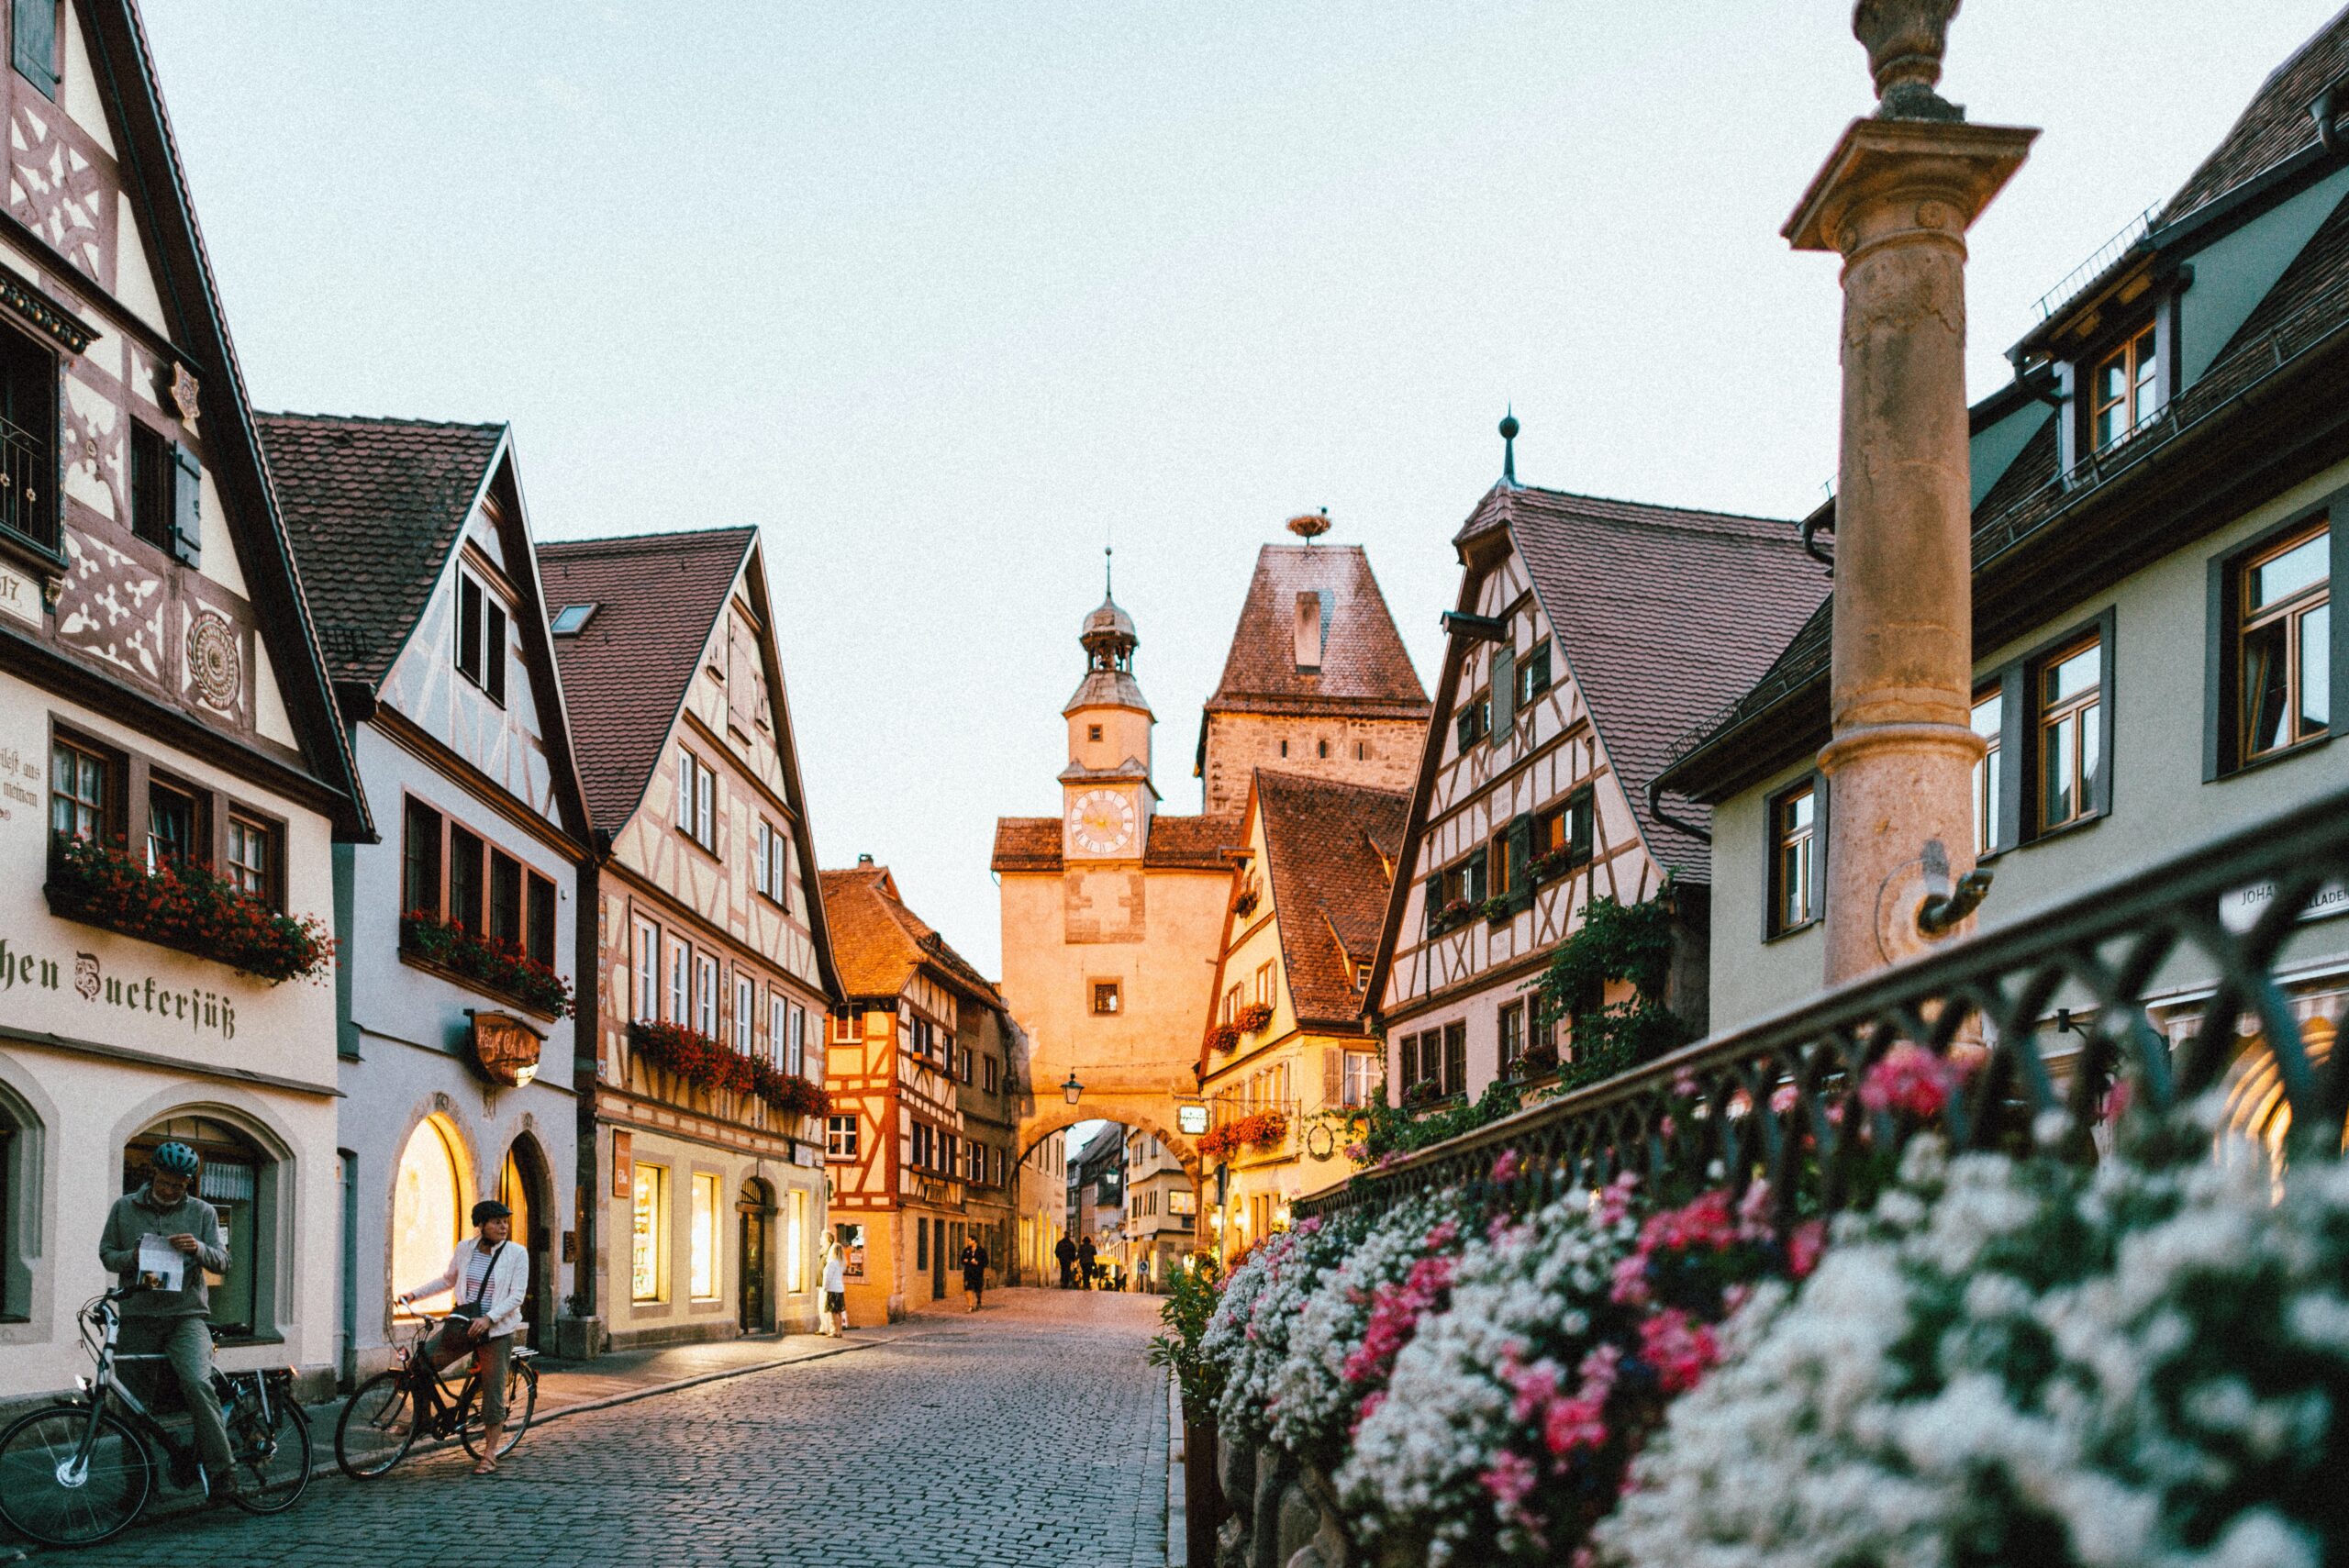 One of the best things to do in Germany? Exploring unique towns and cities like Rothenburg ob der Tauber